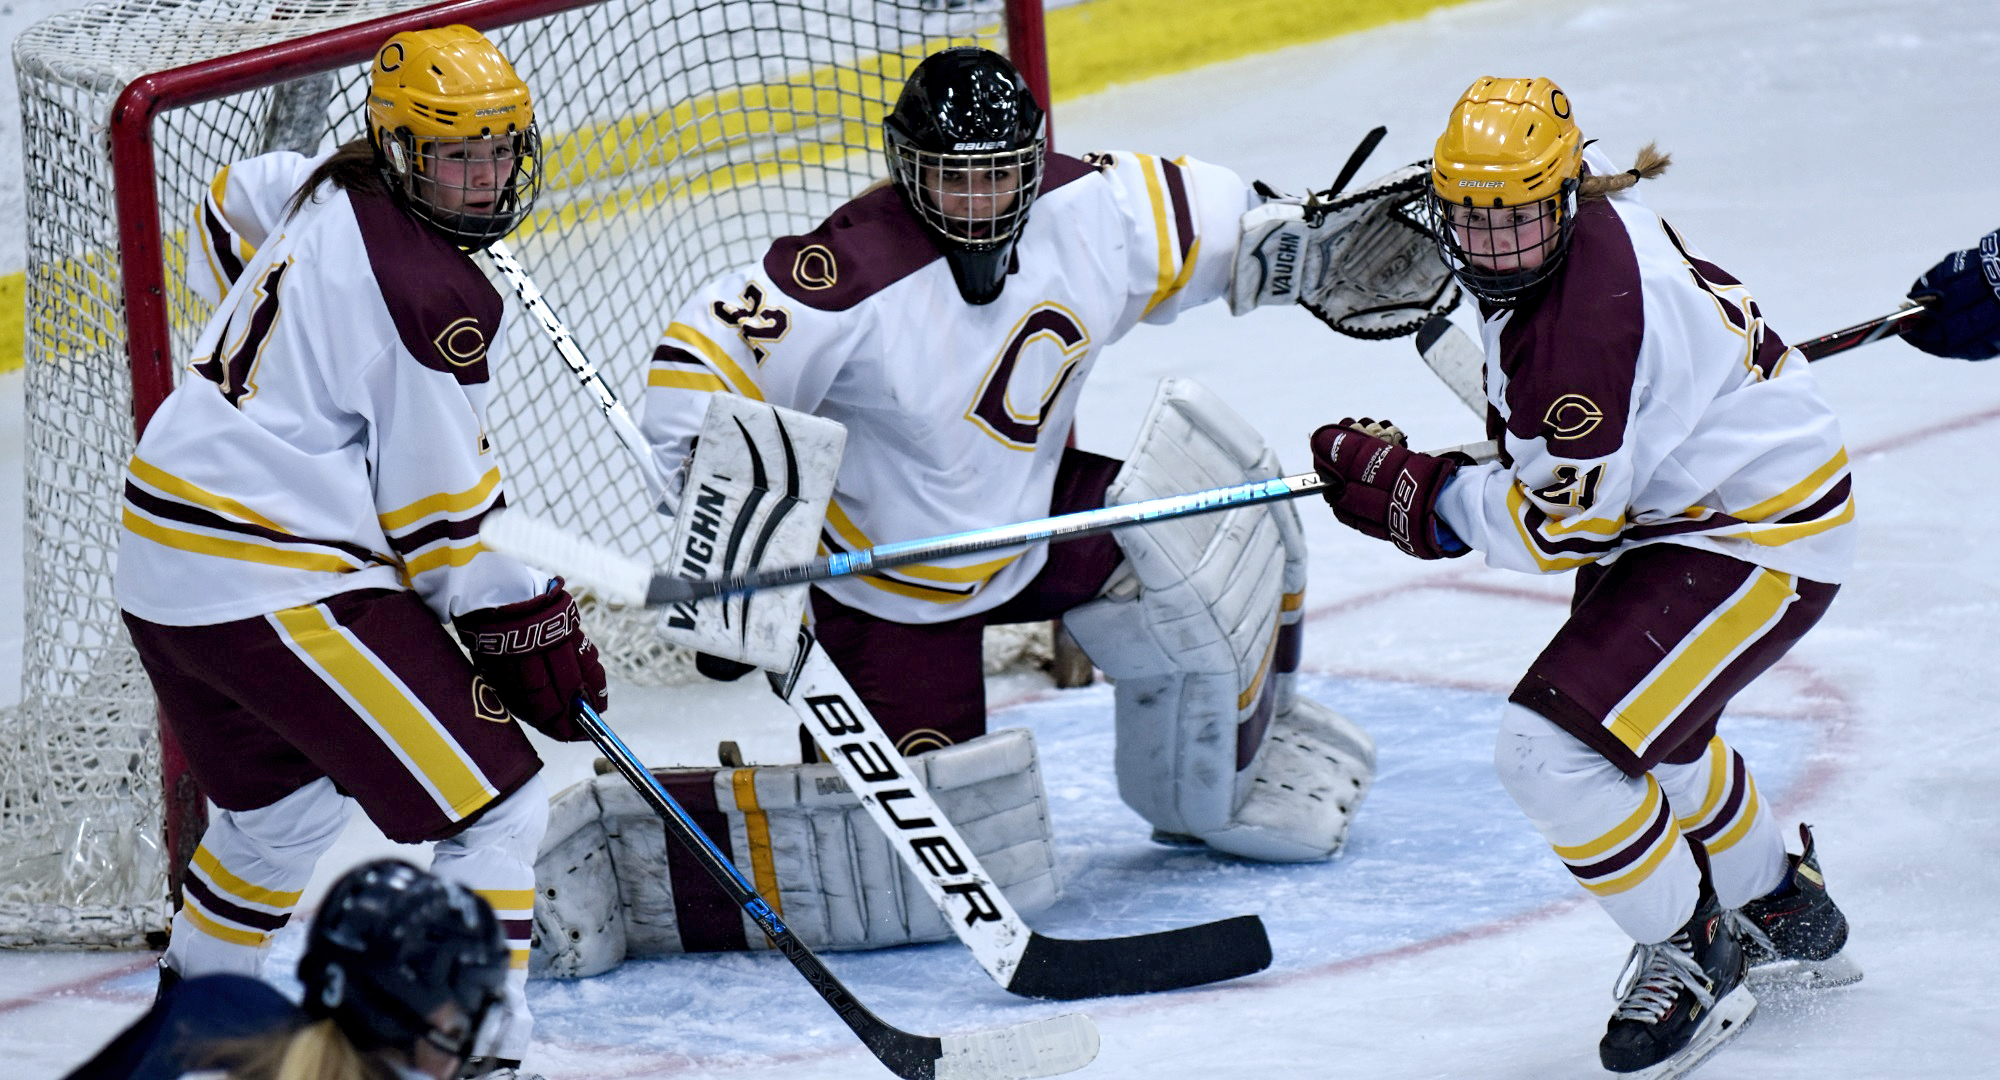 Senior goalie Brittany Boss stopped 25 of the 26 shots she faced and the Cobber defense helped the team beat St. Olaf 2-1 to earn the series sweep.